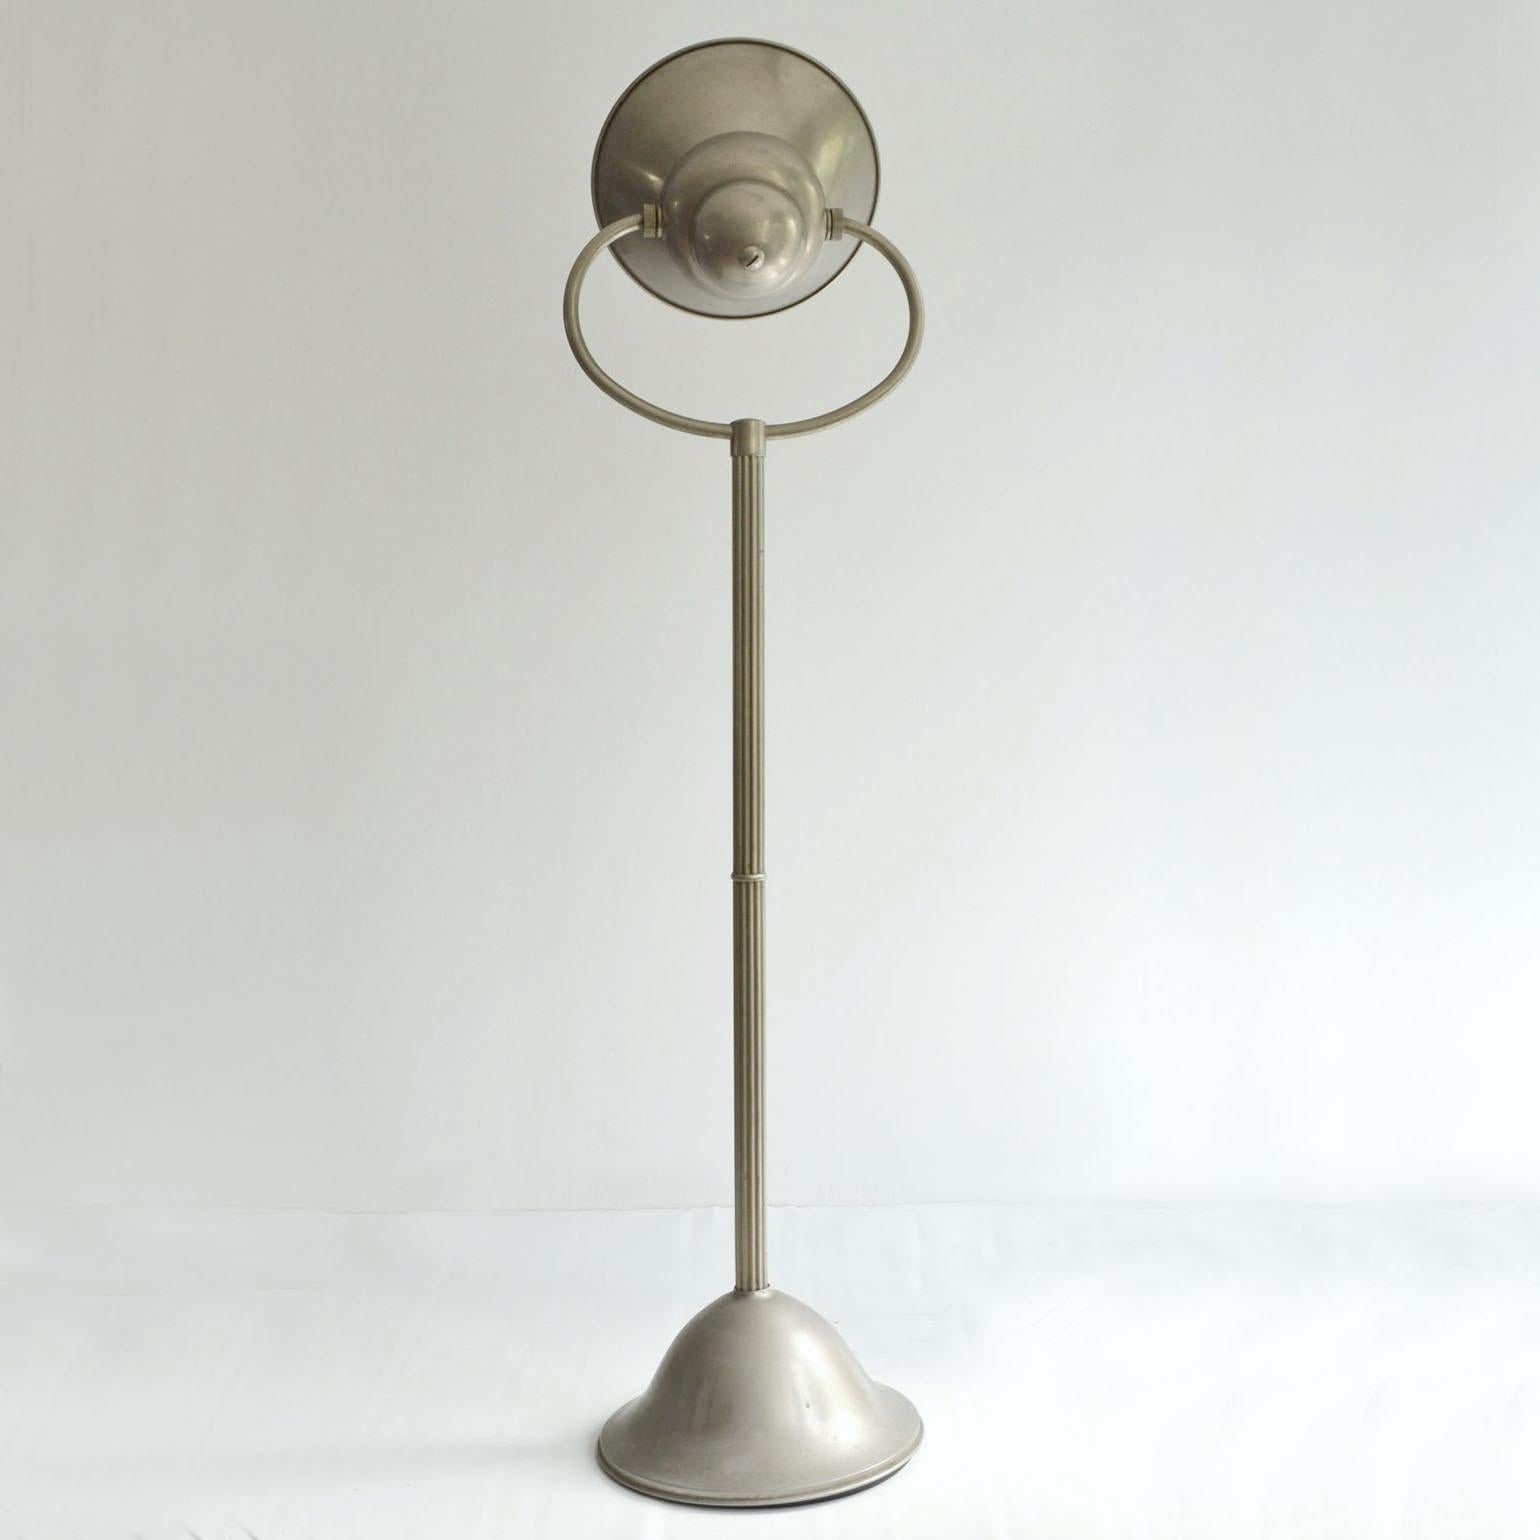 Art Deco Floor Lamp 1920's with Adjustable Shade in Nickel Attributed to Gispen  For Sale 6